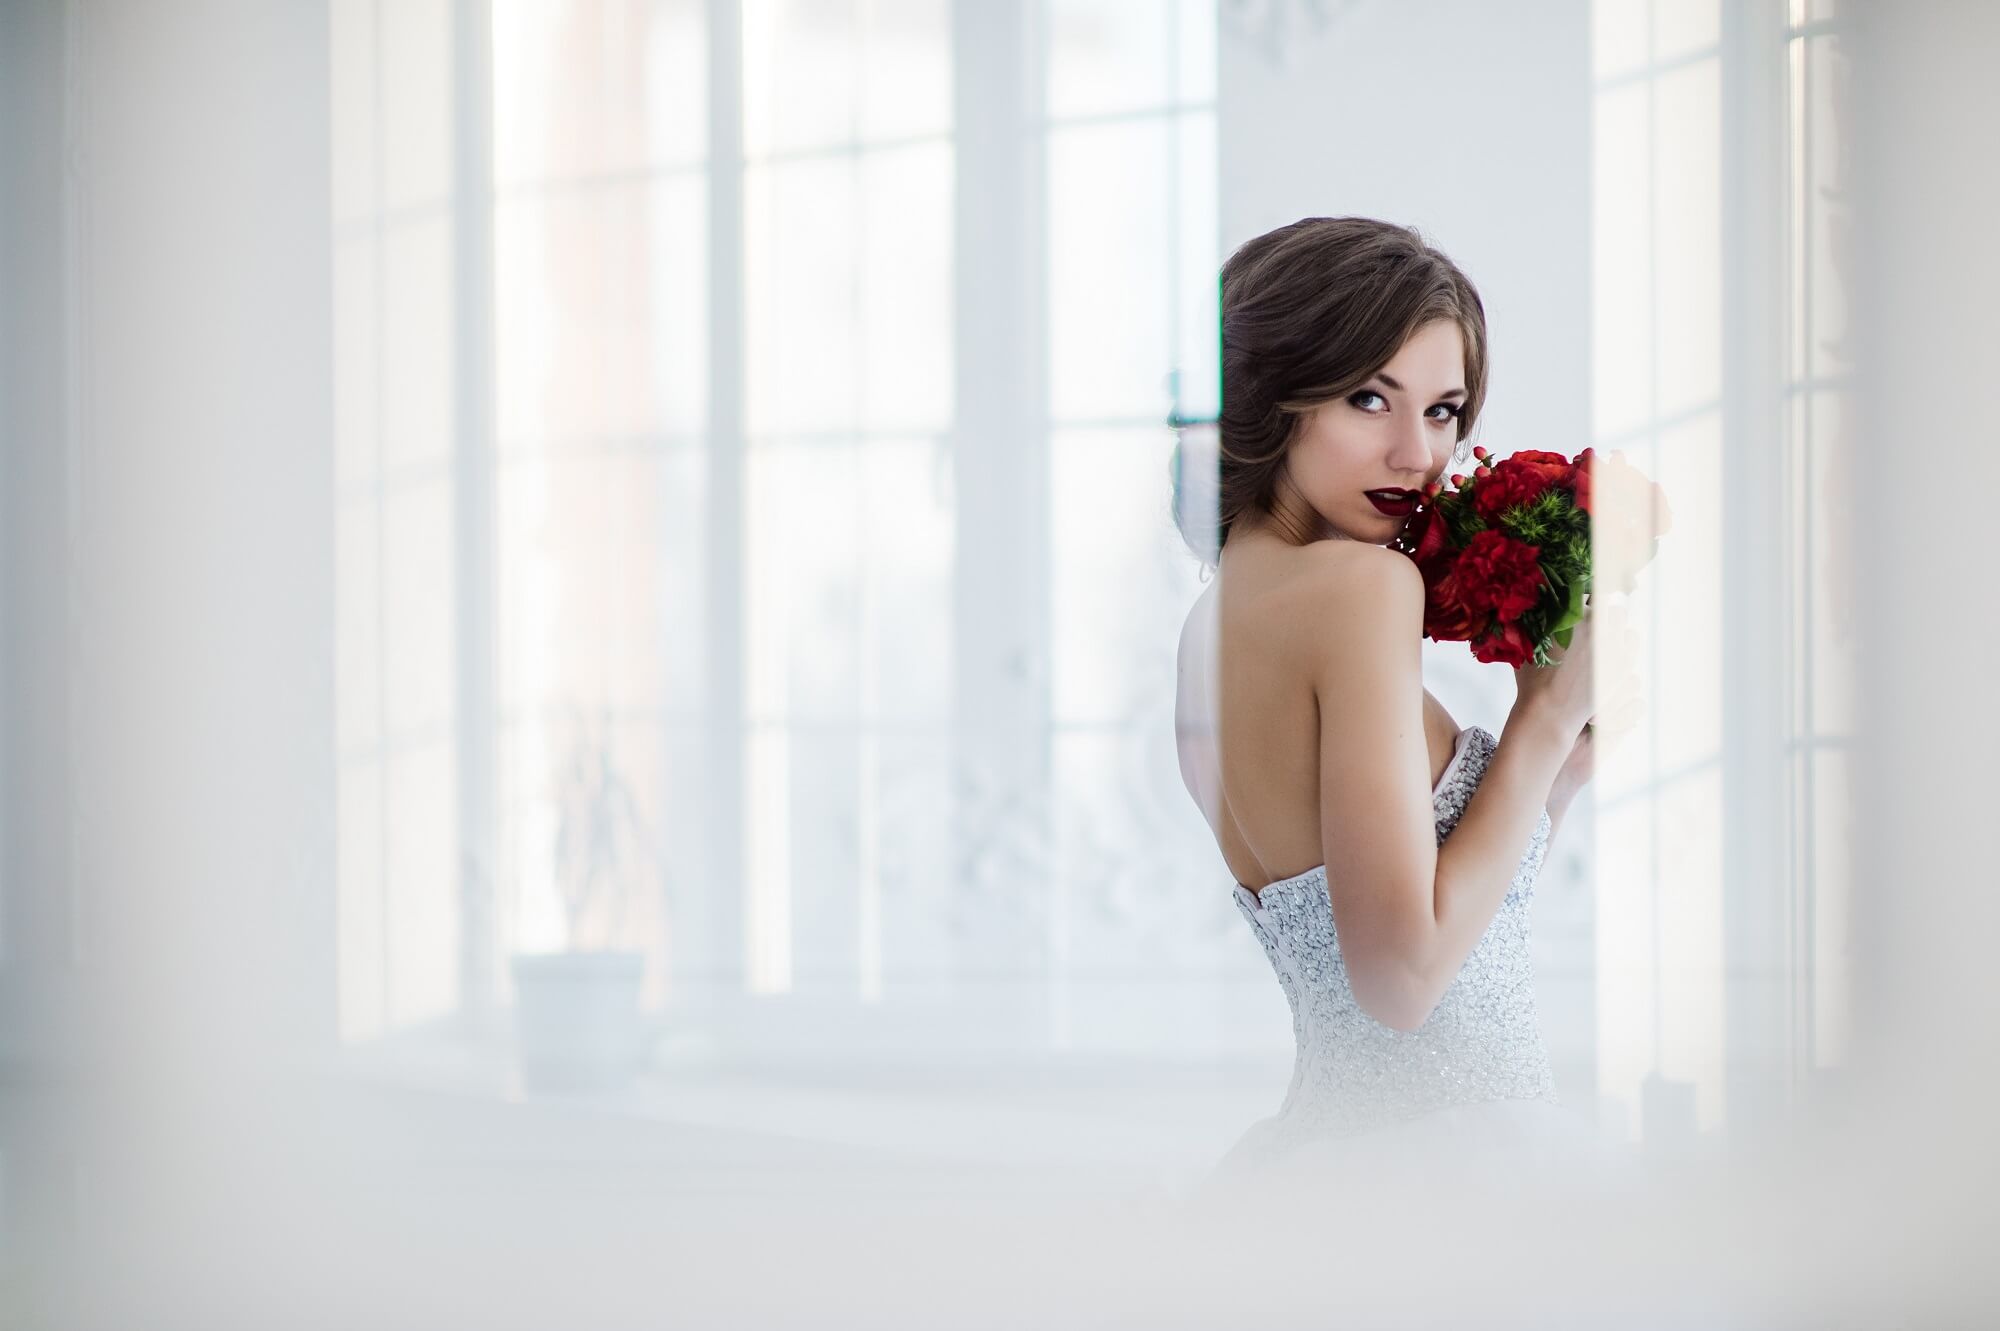 Glamorous young bride wearing wedding dress with flowers standing in front of doors indoors at luxury interior room.